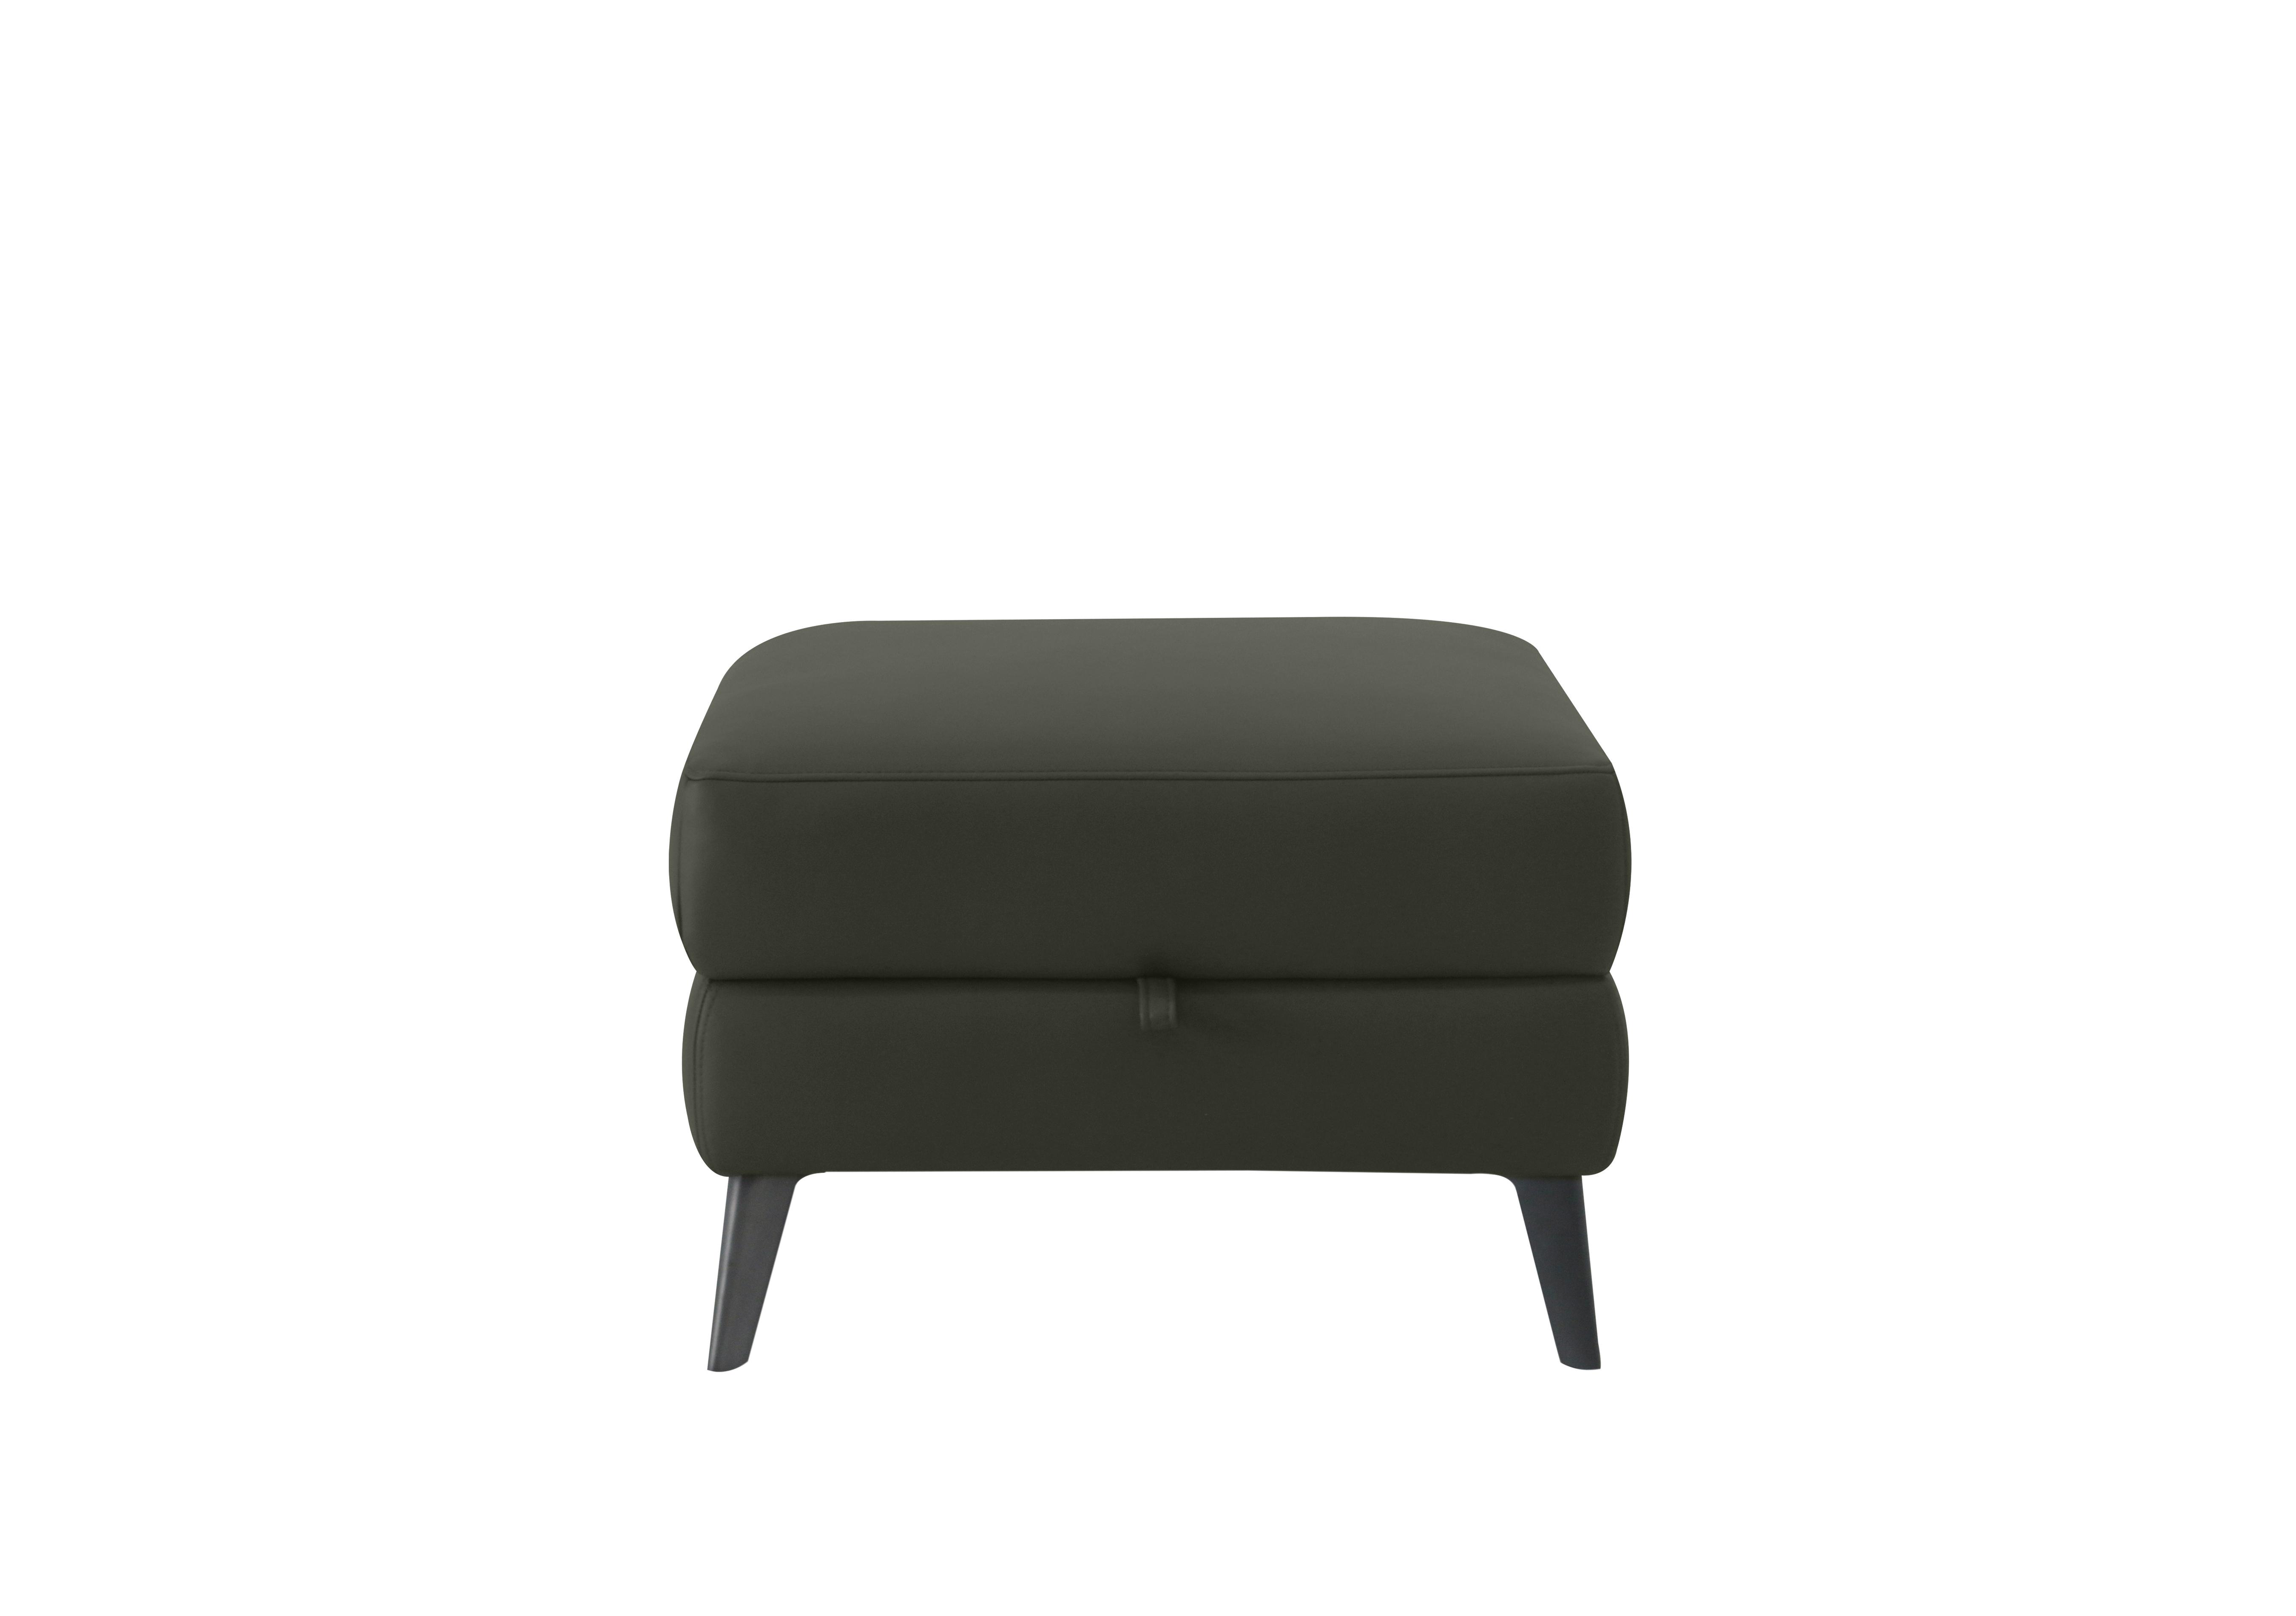 Huxley Leather Storage Footstool in Nn-570e Olive Green on Furniture Village